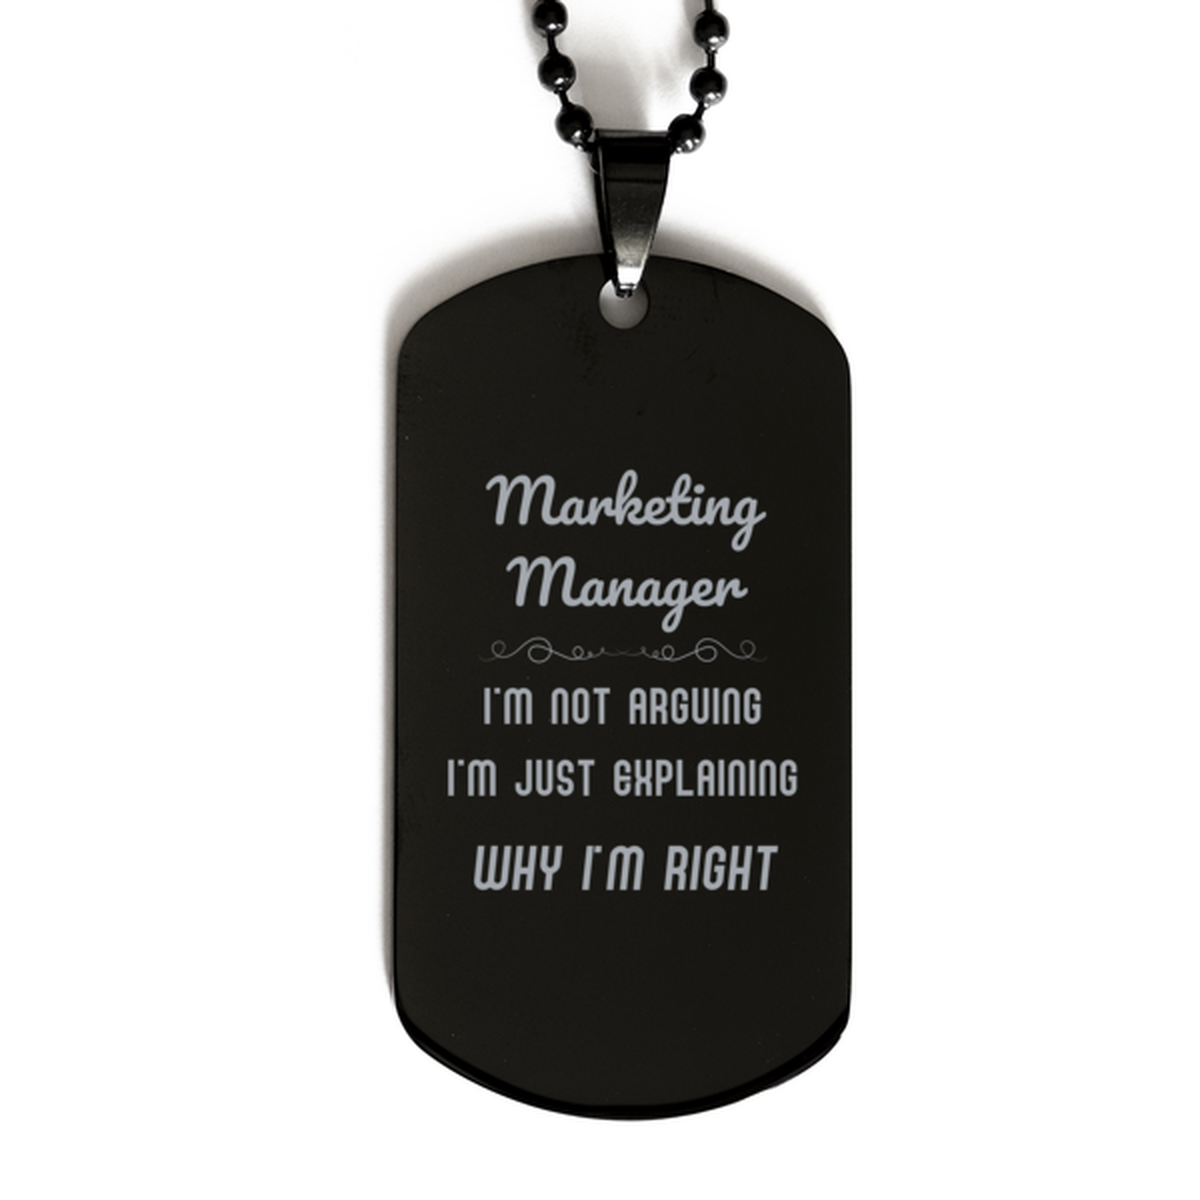 Marketing Manager I'm not Arguing. I'm Just Explaining Why I'm RIGHT Black Dog Tag, Funny Saying Quote Marketing Manager Gifts For Marketing Manager Graduation Birthday Christmas Gifts for Men Women Coworker